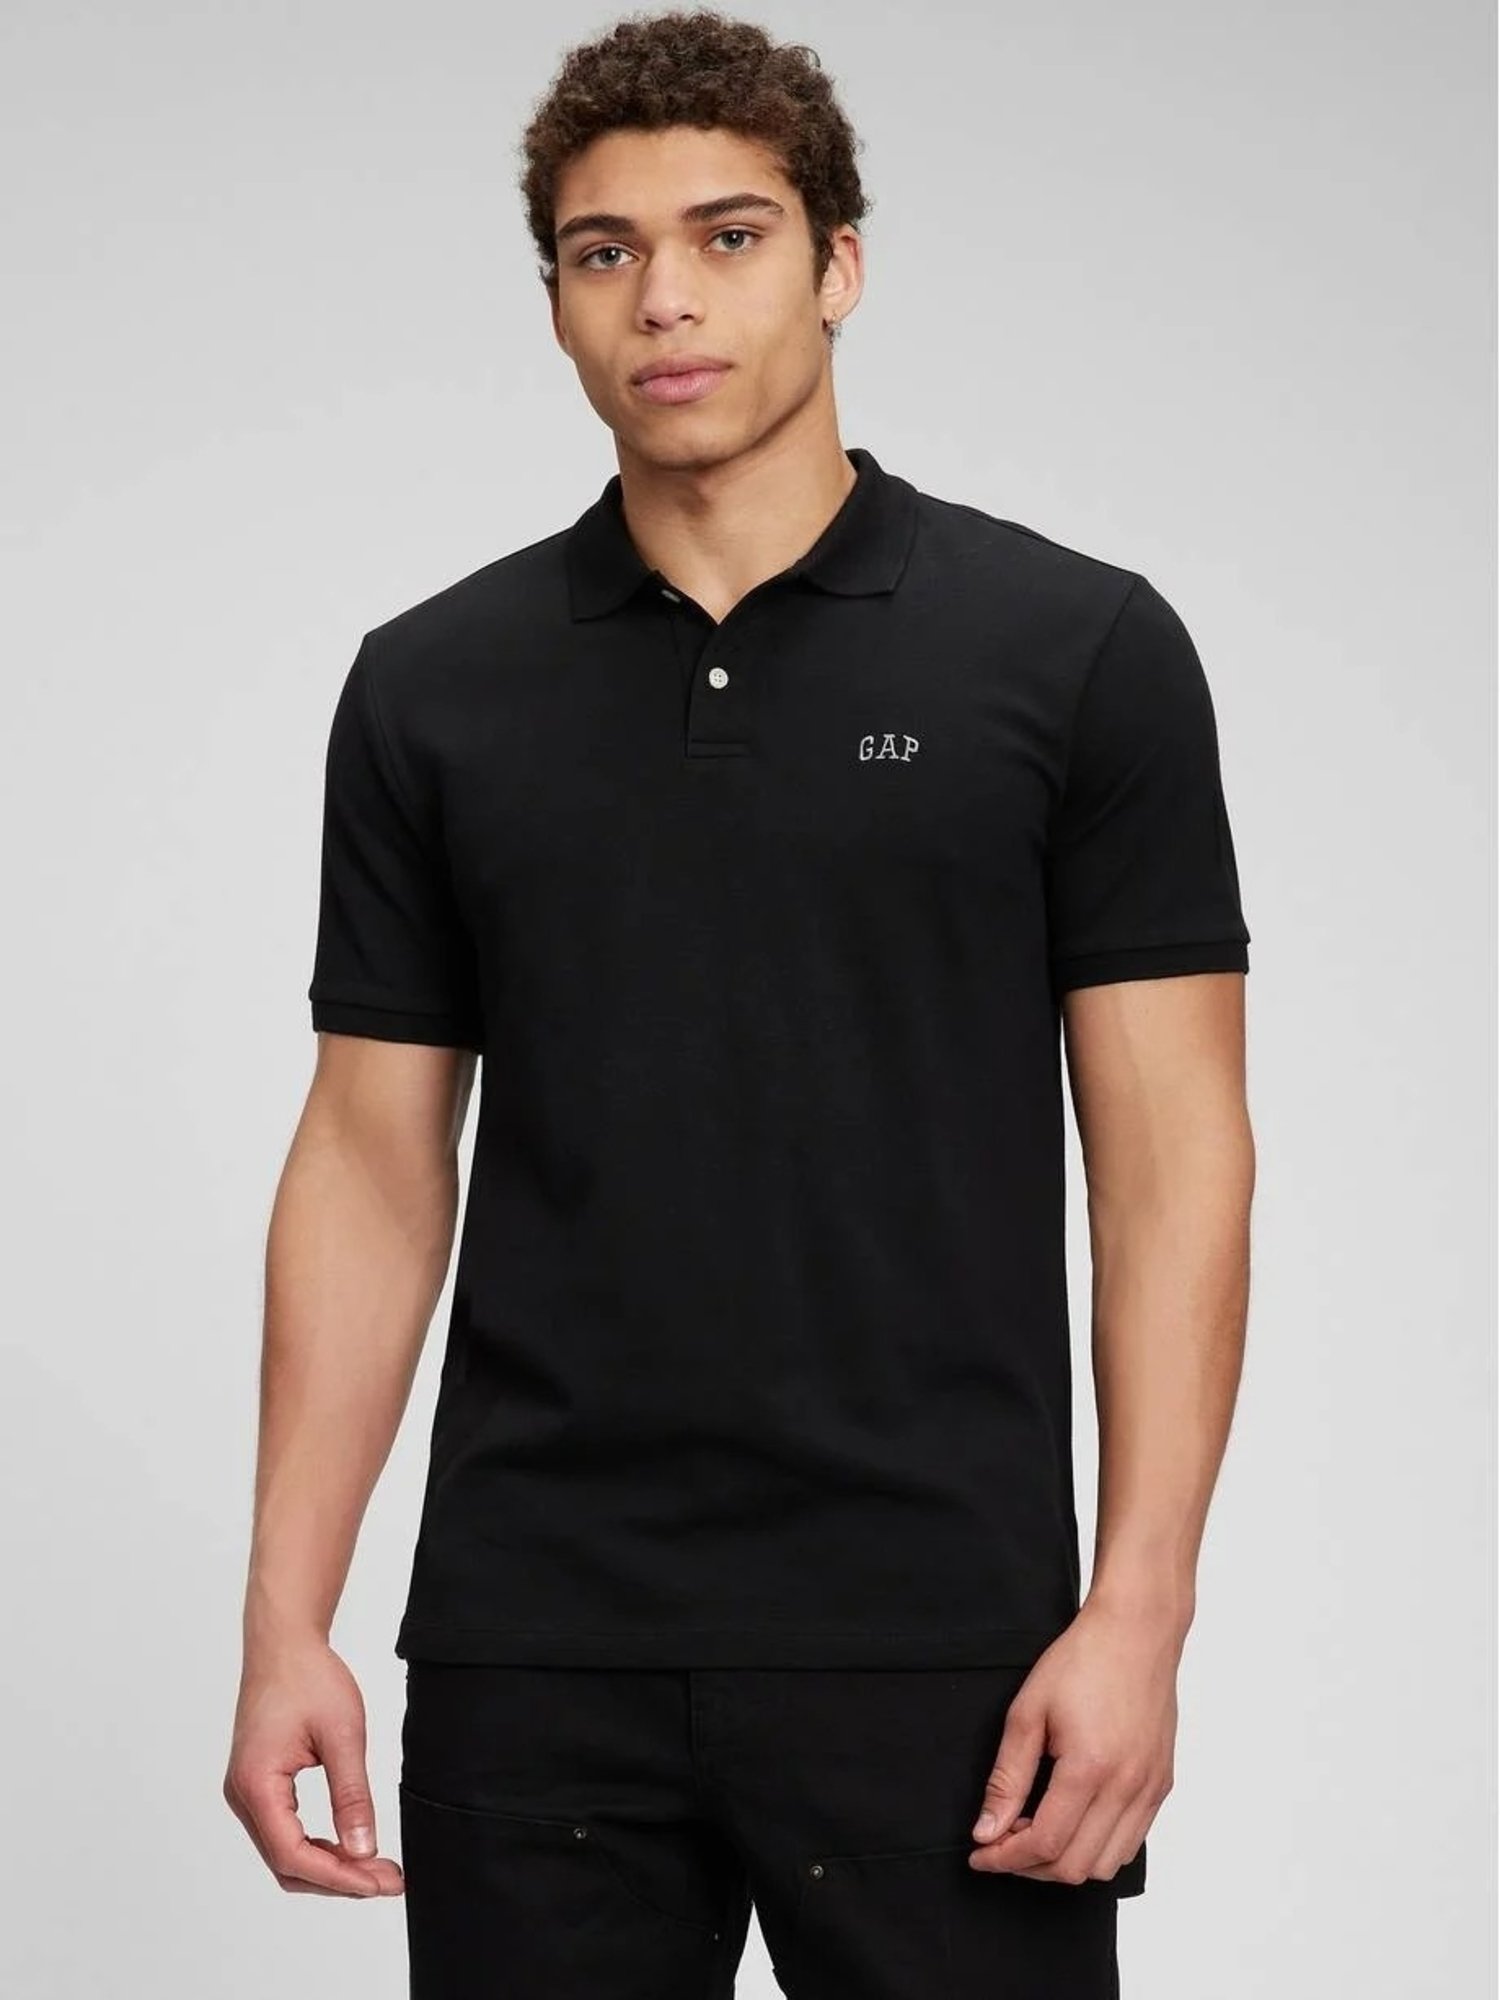 Gap Logo All Day Polo T-Shirt product image